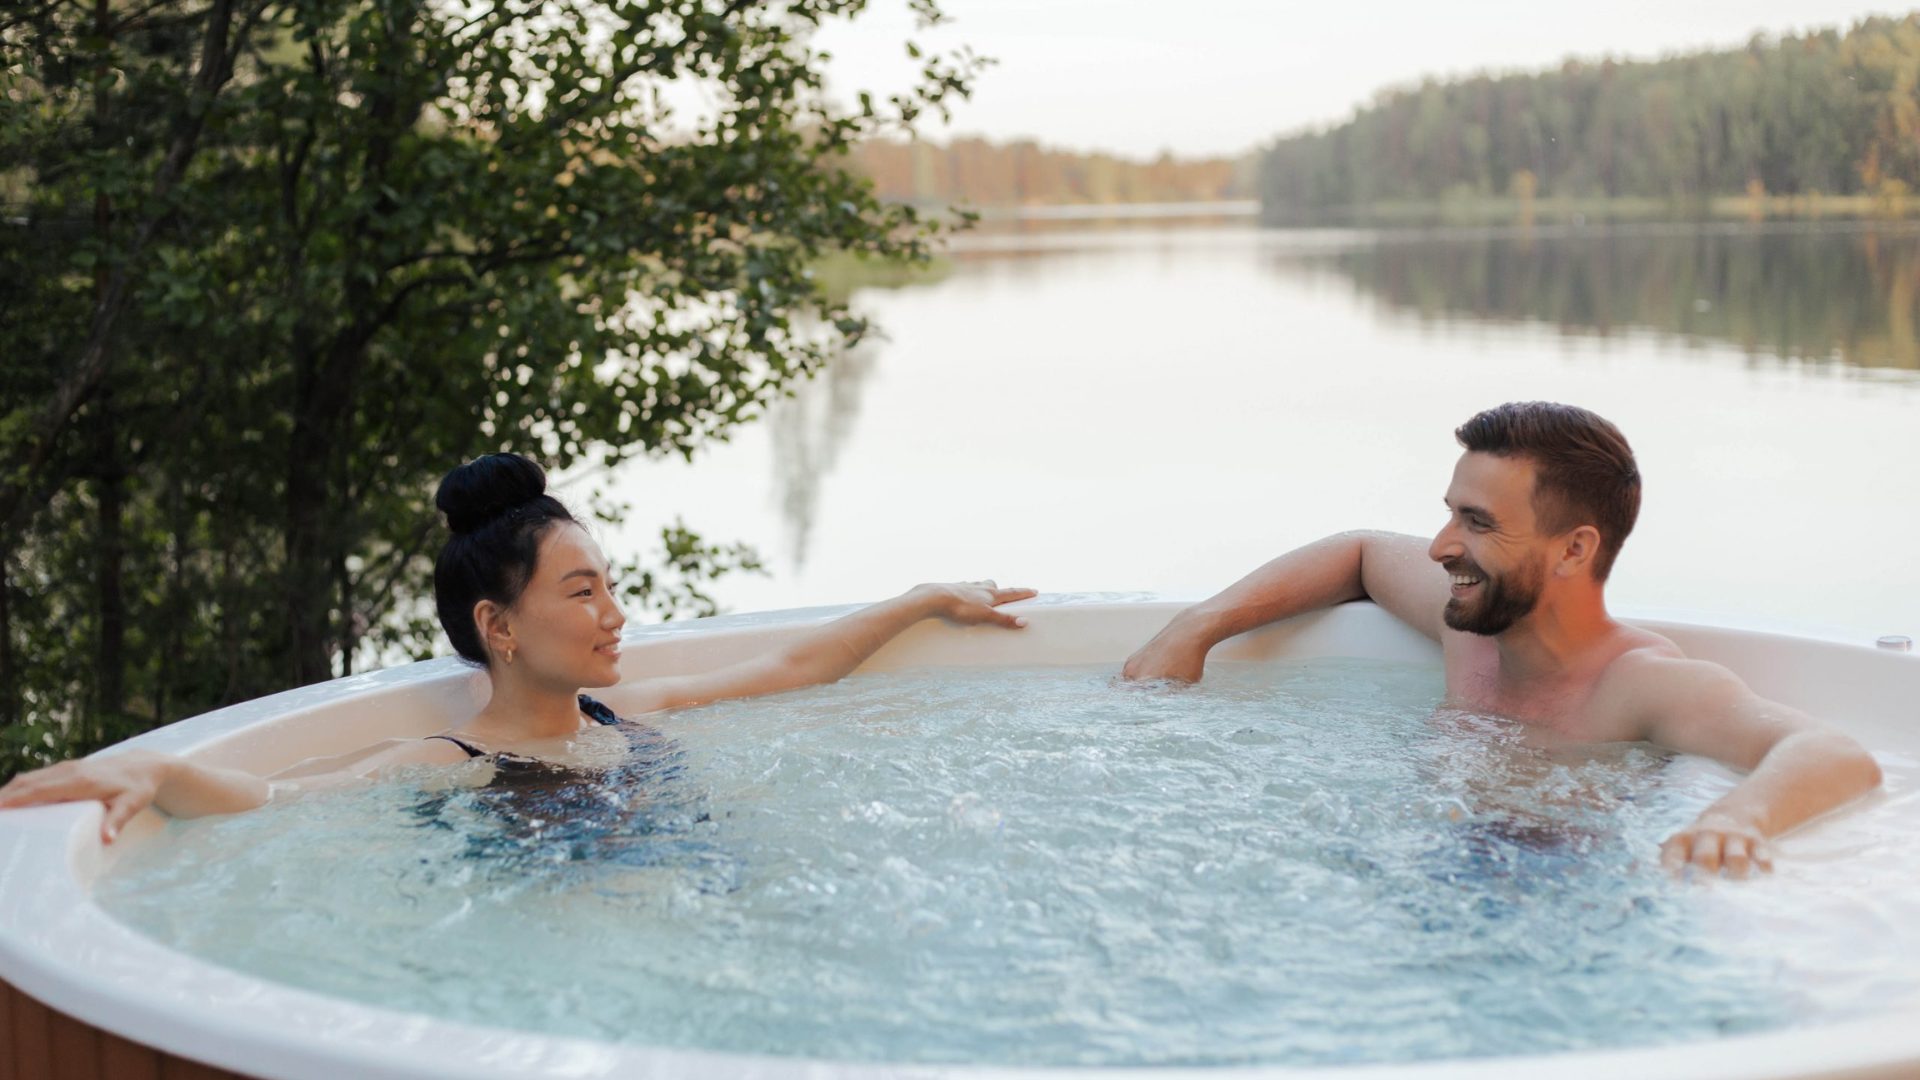 A man and woman relaxing in an outdoor hot tub